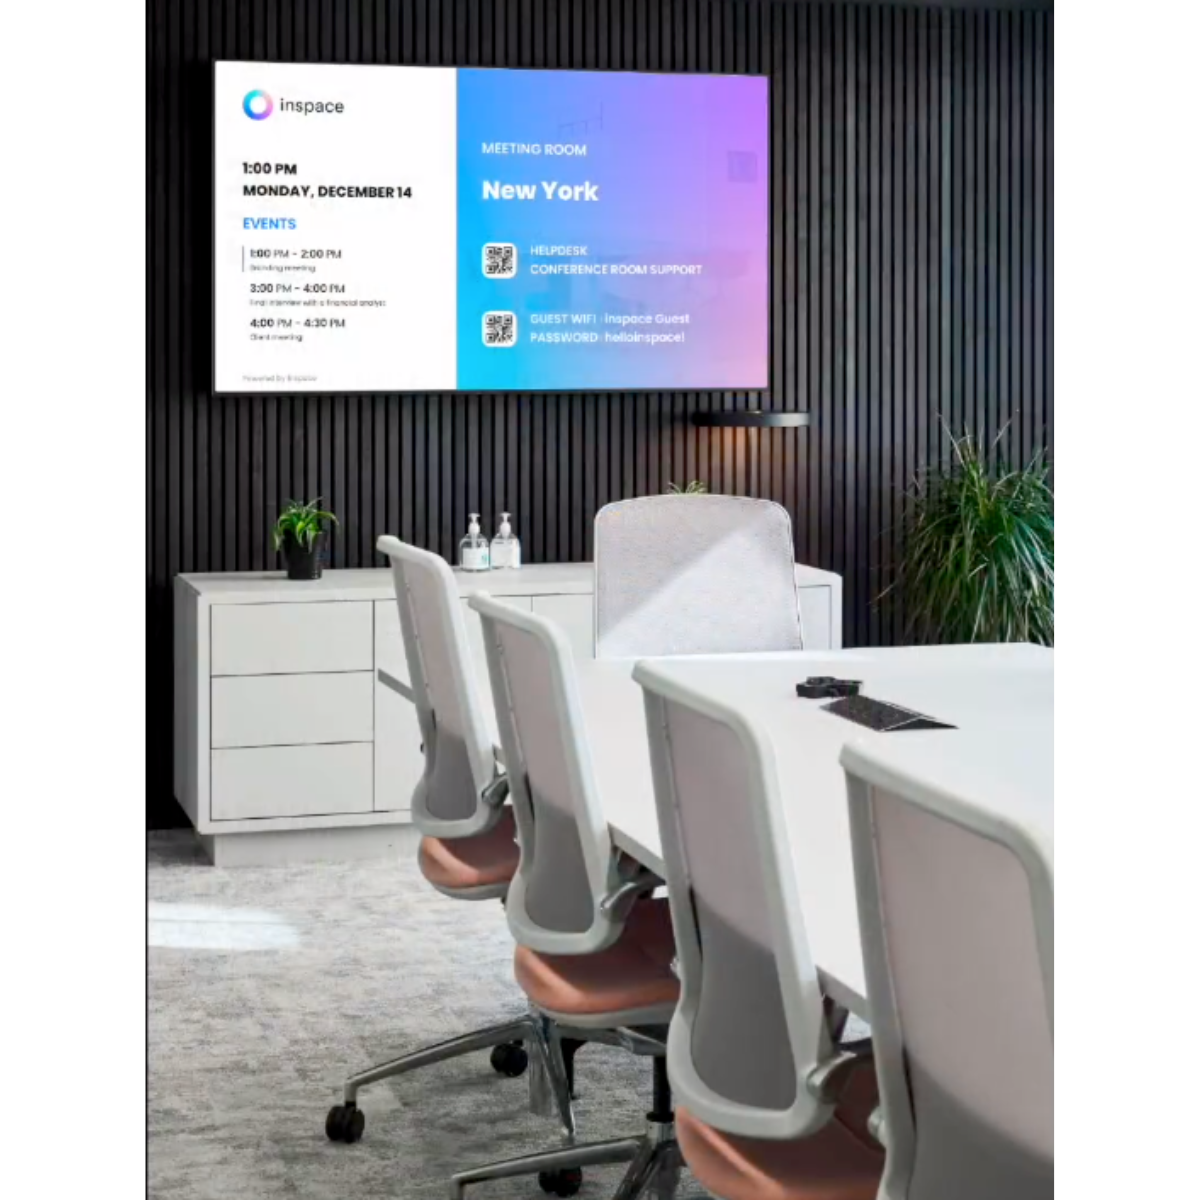 Meeting room panel screens can also be used to show customizable screens with meeting room details